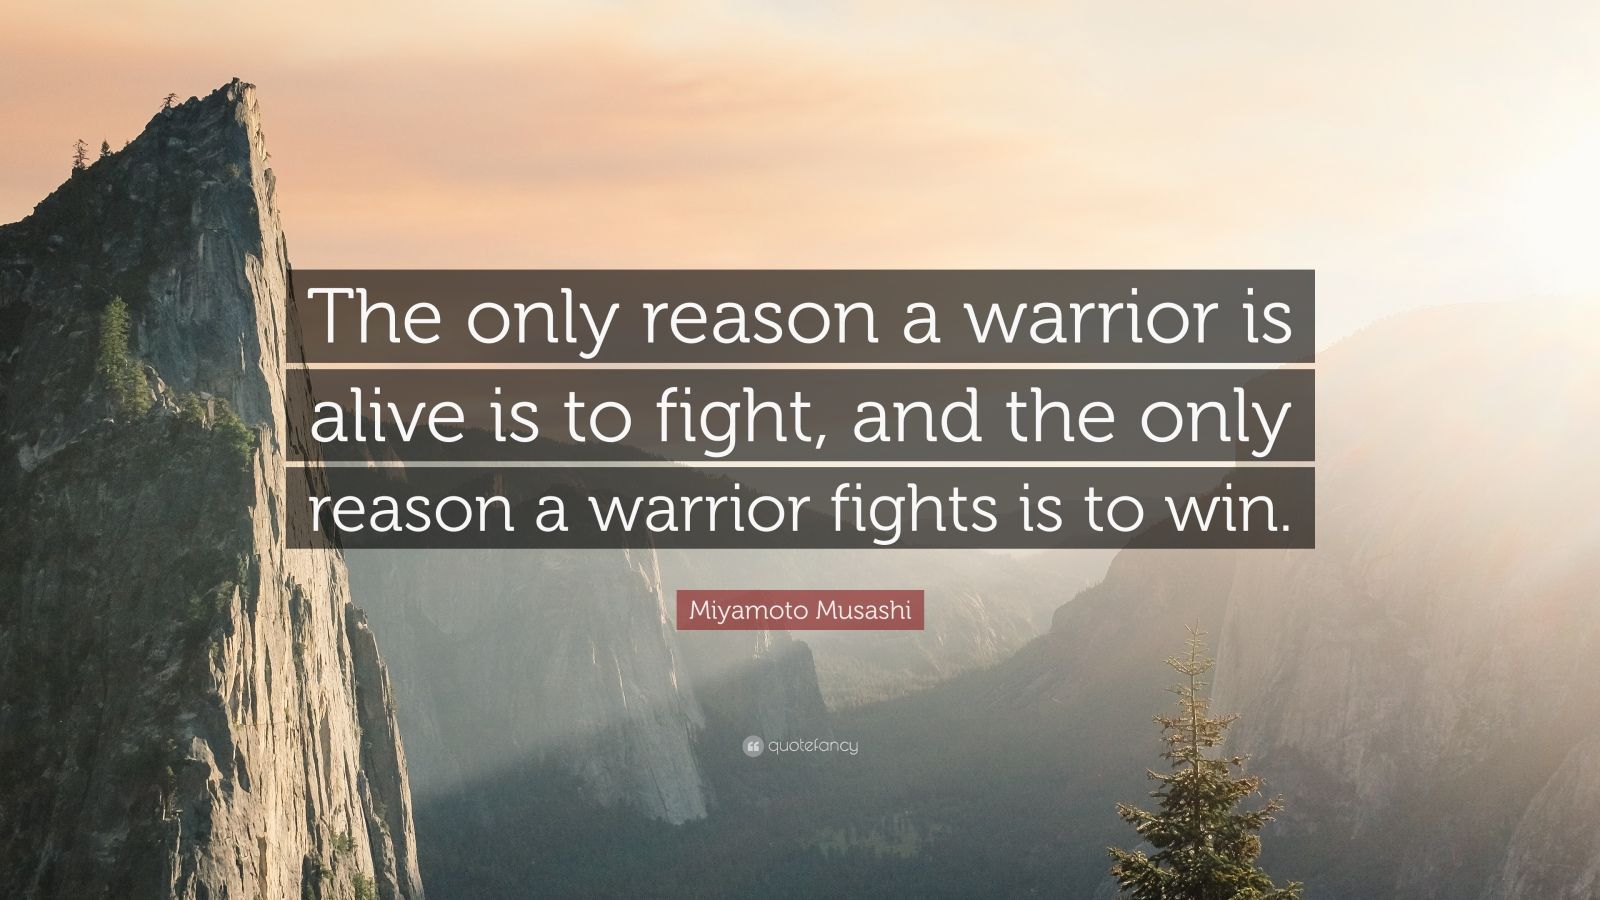 Miyamoto Musashi Quote: “The only reason a warrior is alive is to fight